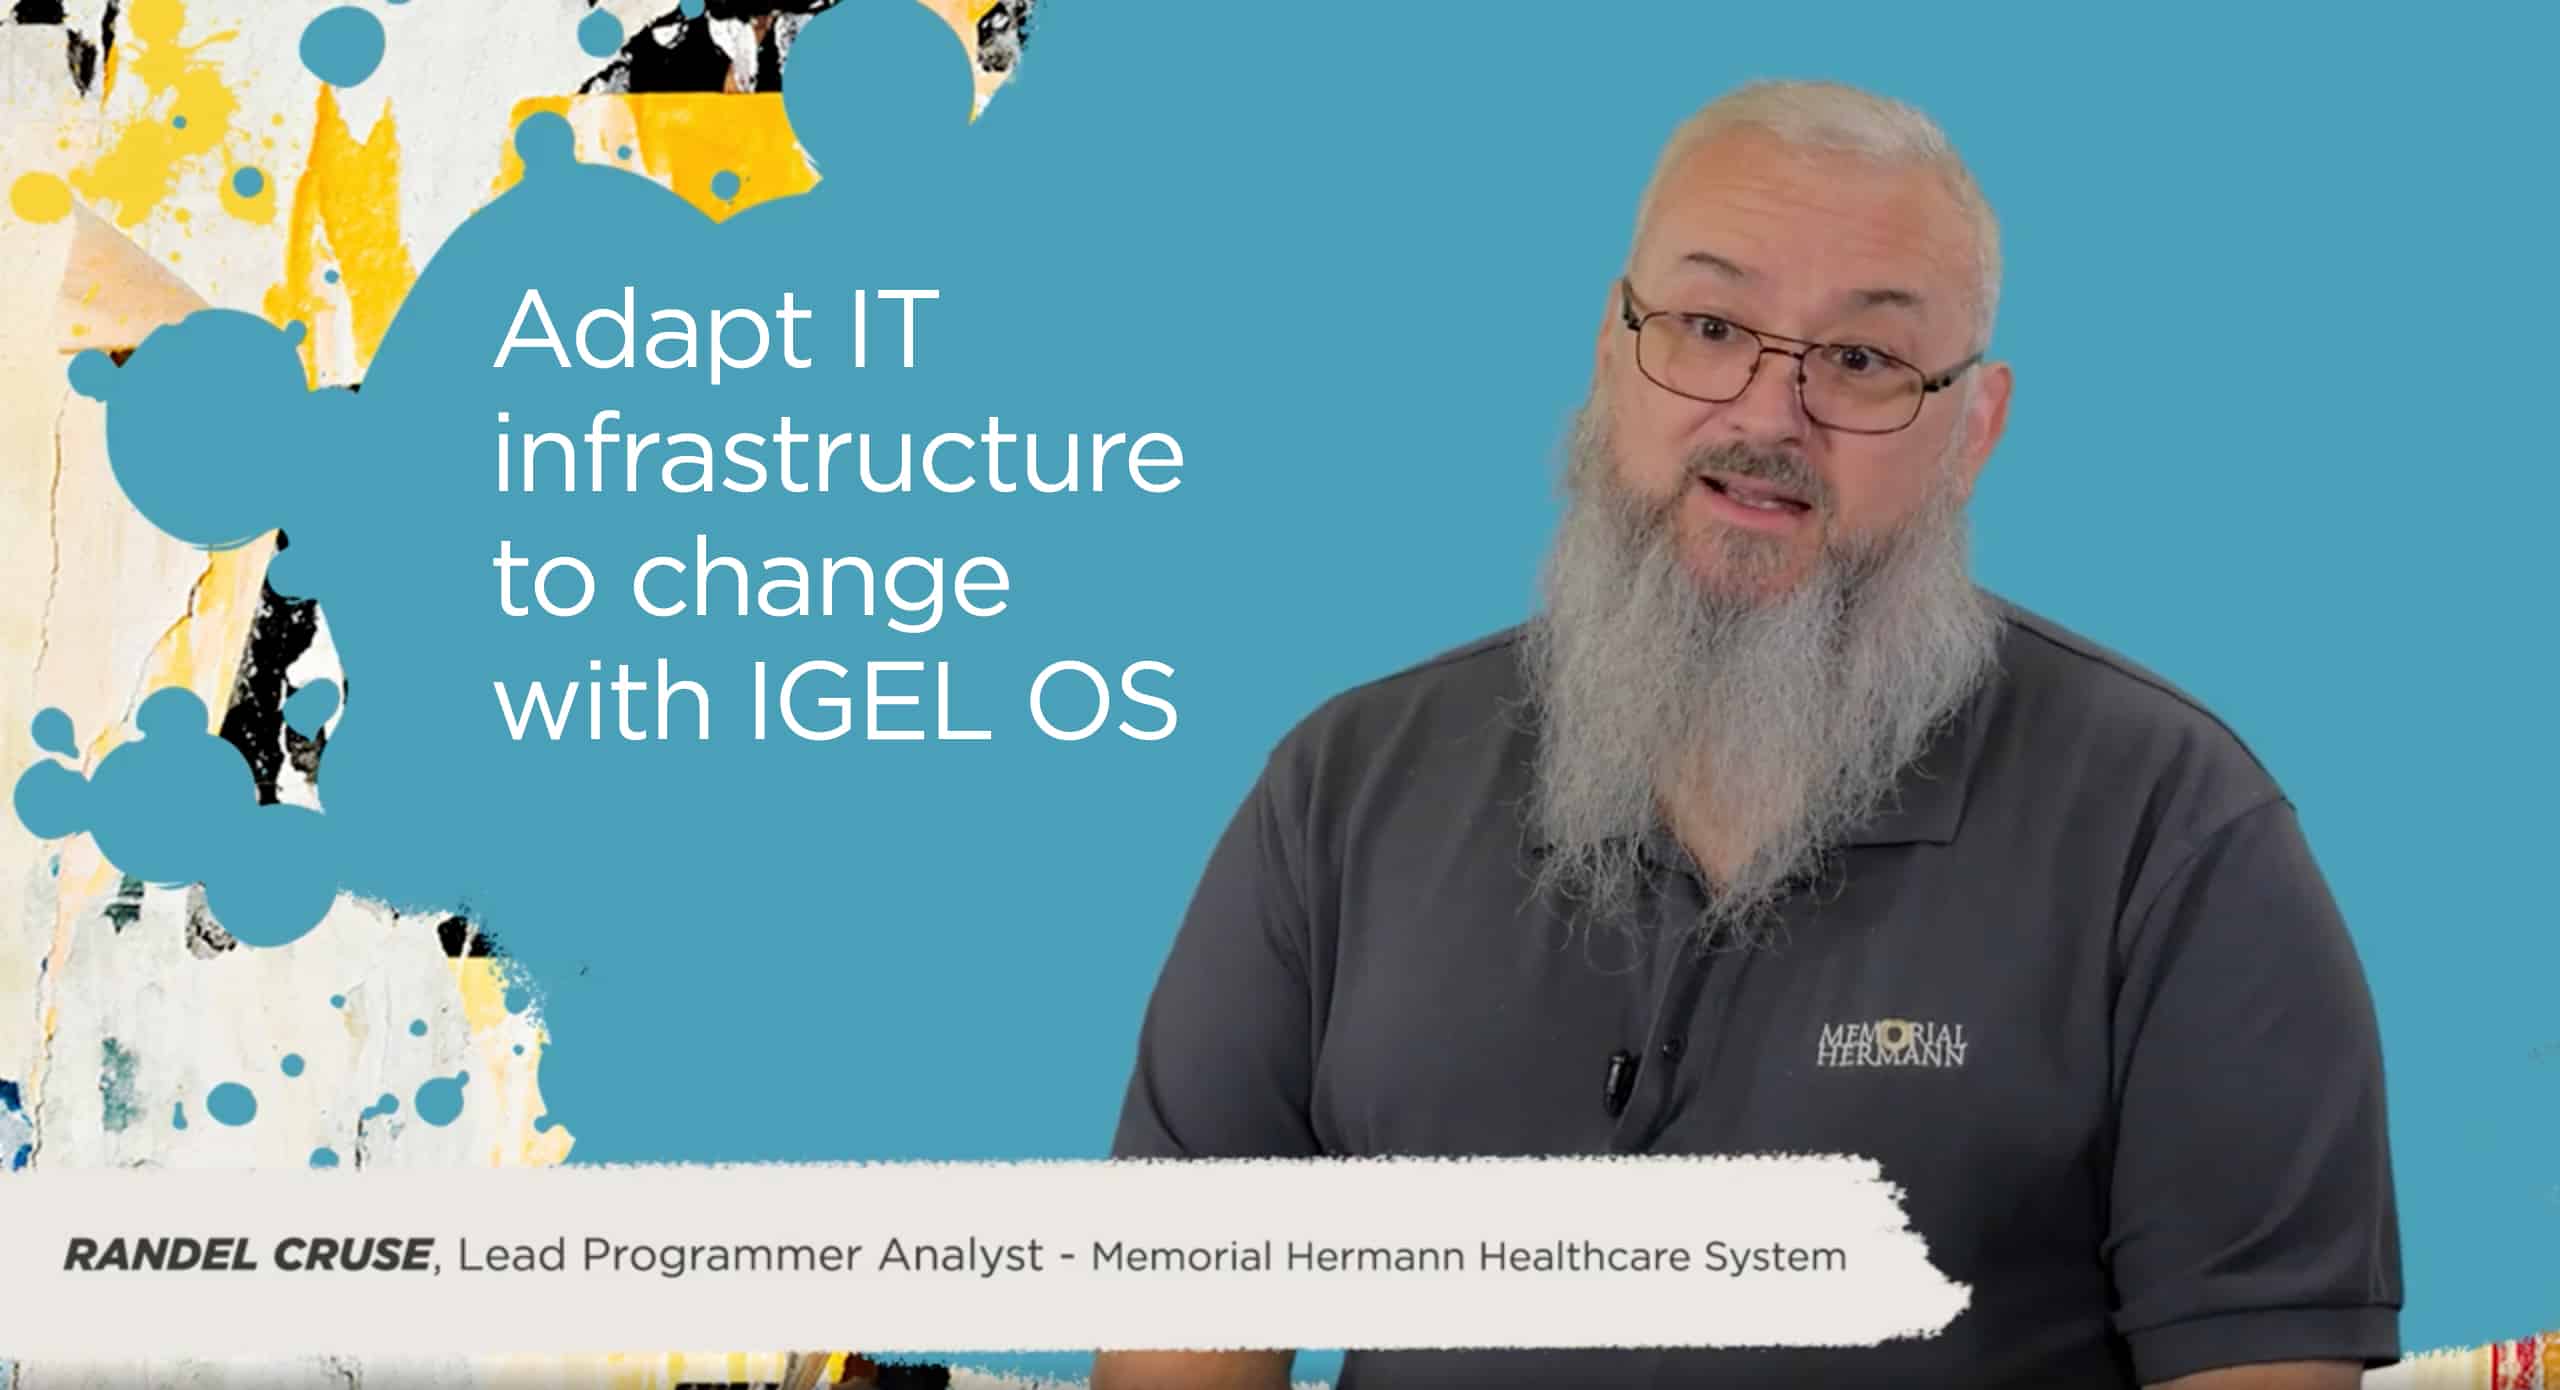 Adapt IT infrastructure to change with IGEL OS (Randel Cruse, Memorial Hermann)